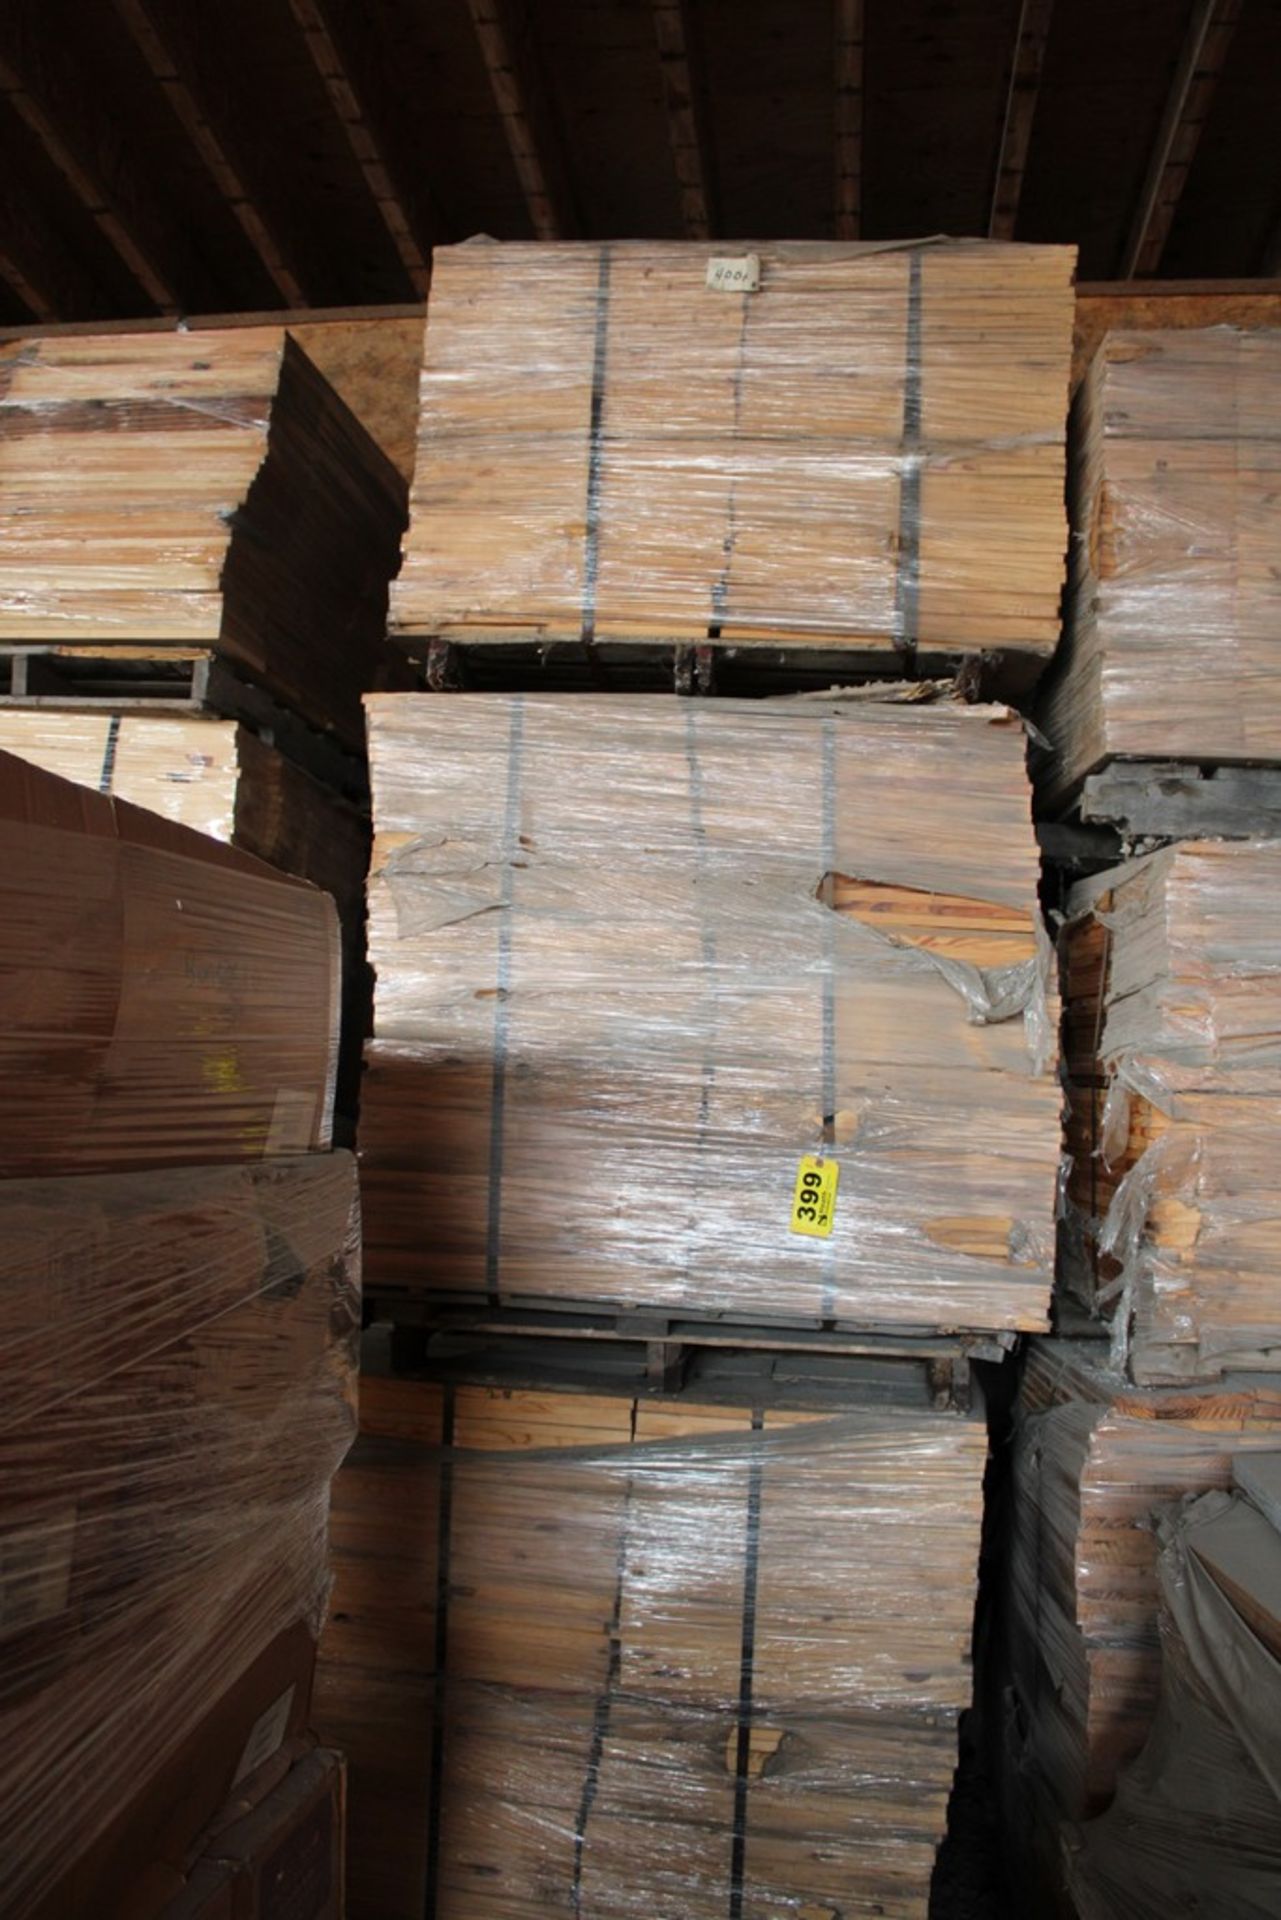 LARGE QUANTITY OF 9" X 24" PINE BOARDS IN STACK